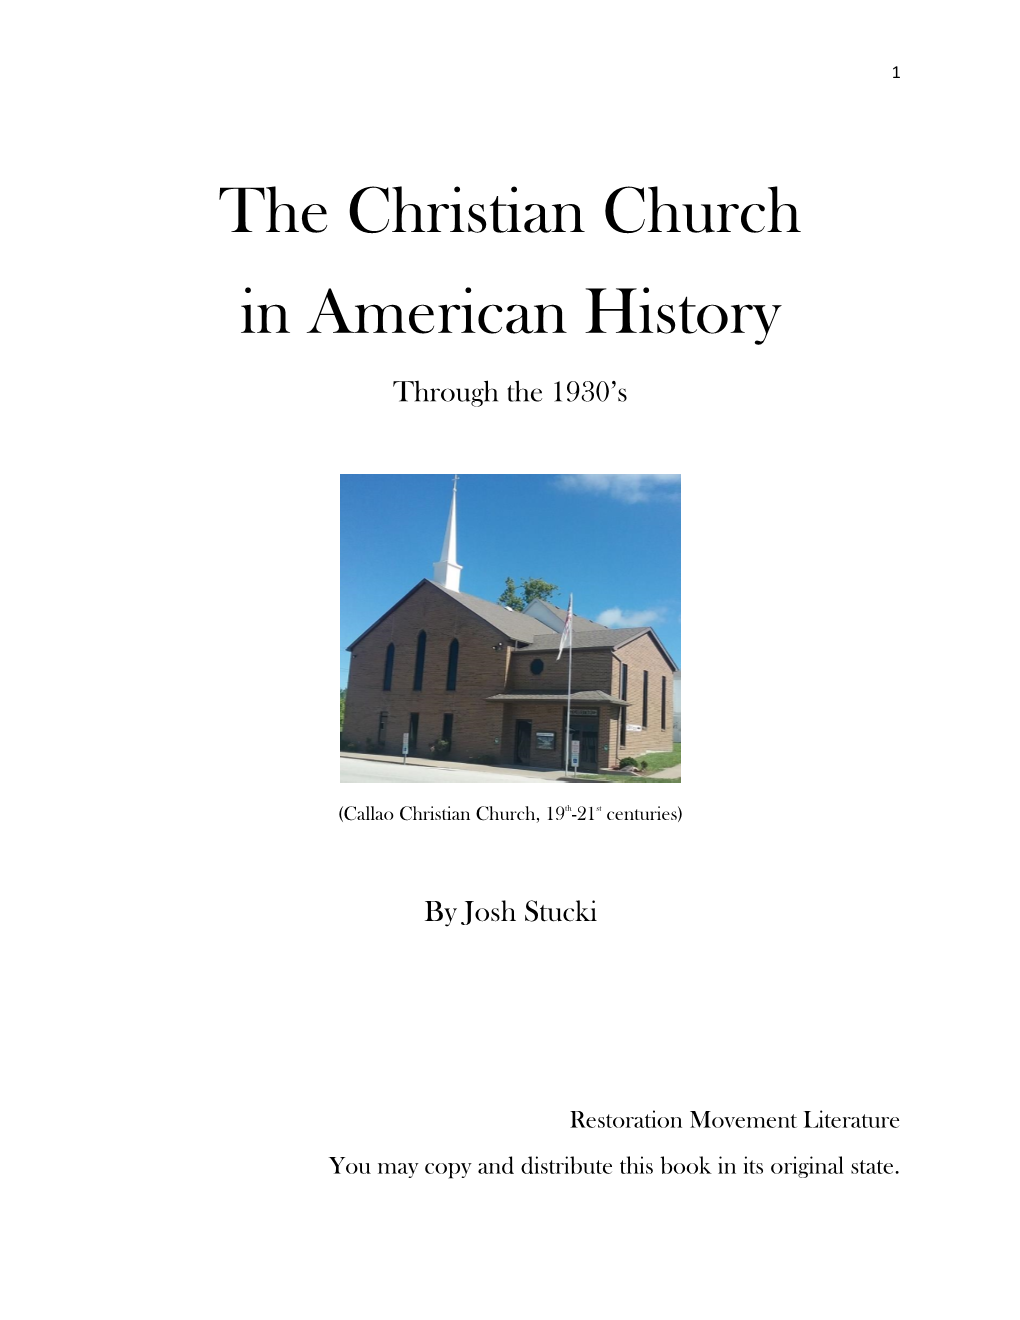 The Christian Church in American History